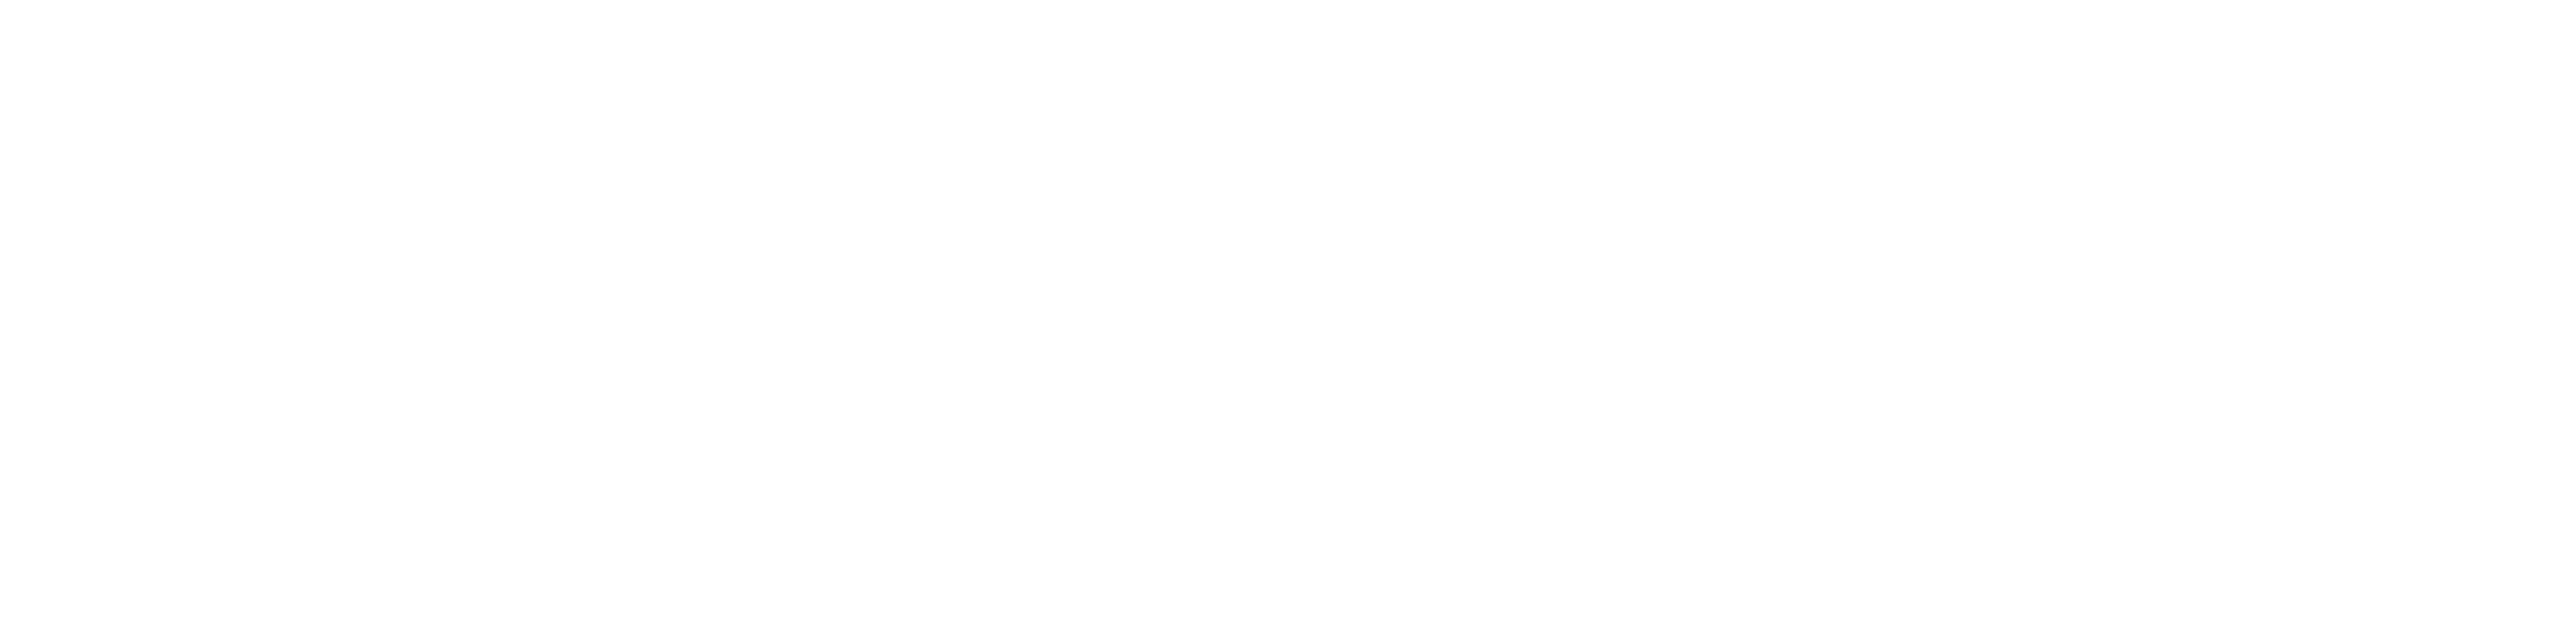 X-Files Logo - The Smart Home Turns On Scully